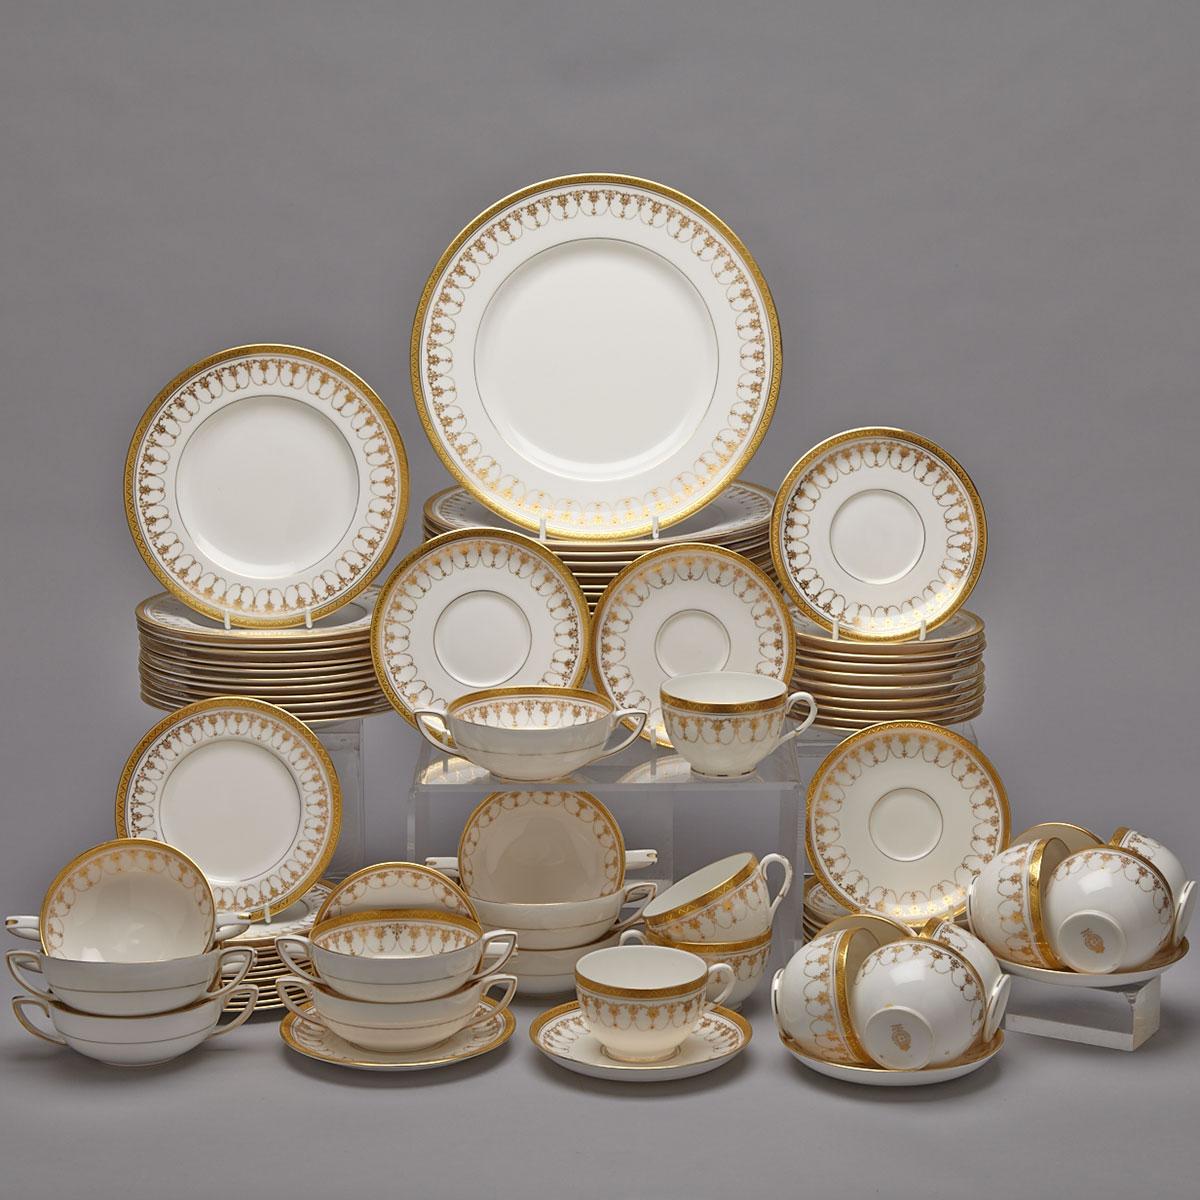 Royal Worcester ‘Imperial’ Pattern Service, 20th century